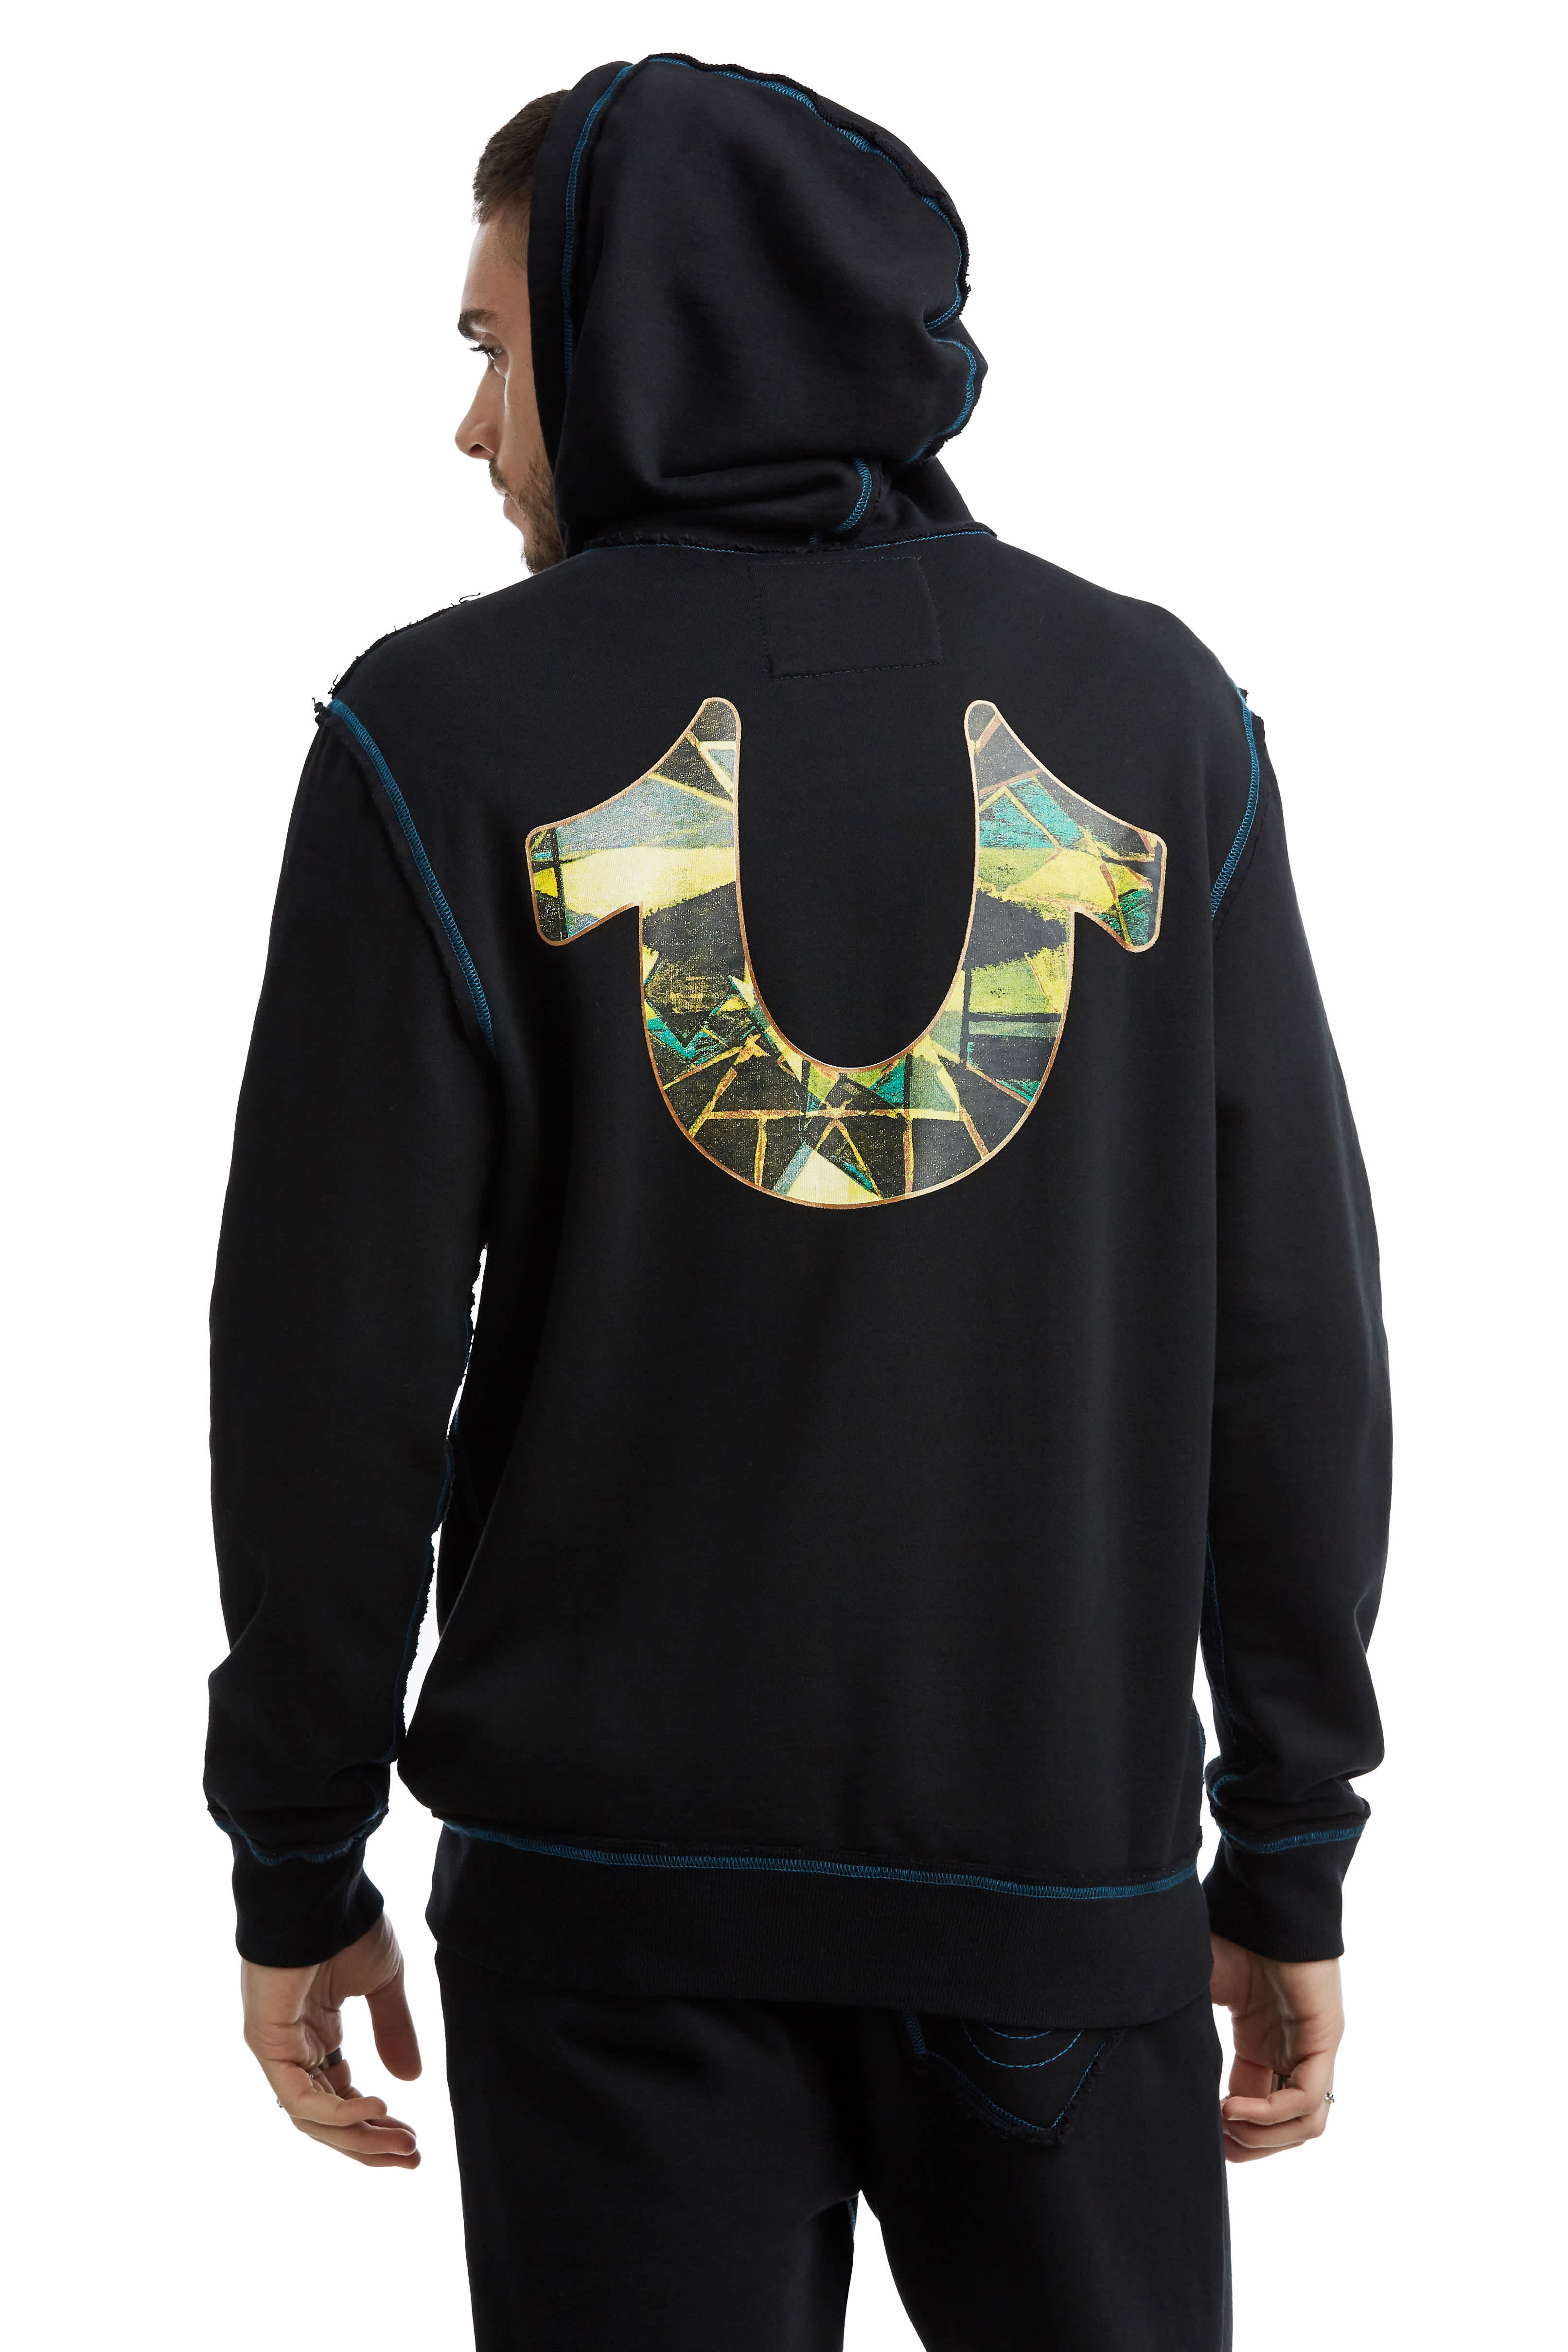 MENS RAW EDGE STAINED GLASS ZIP UP HOODIE